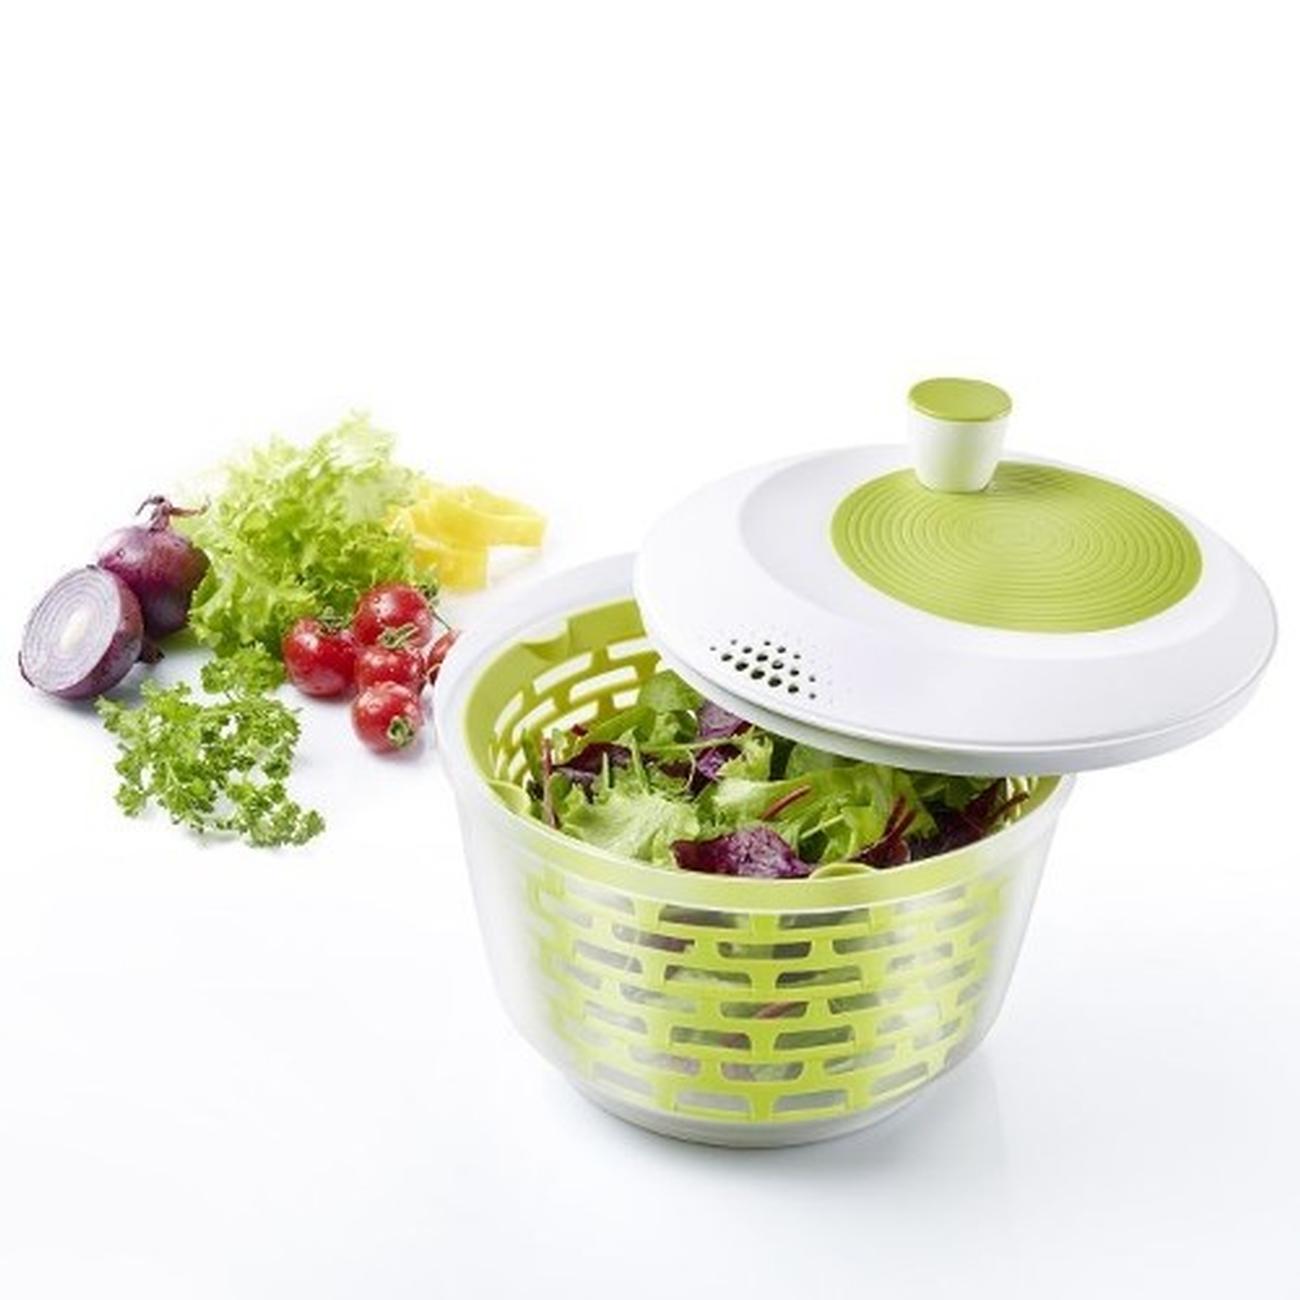 Westmark German Vegetable and Salad Spinner with Pouring Spout (Green)